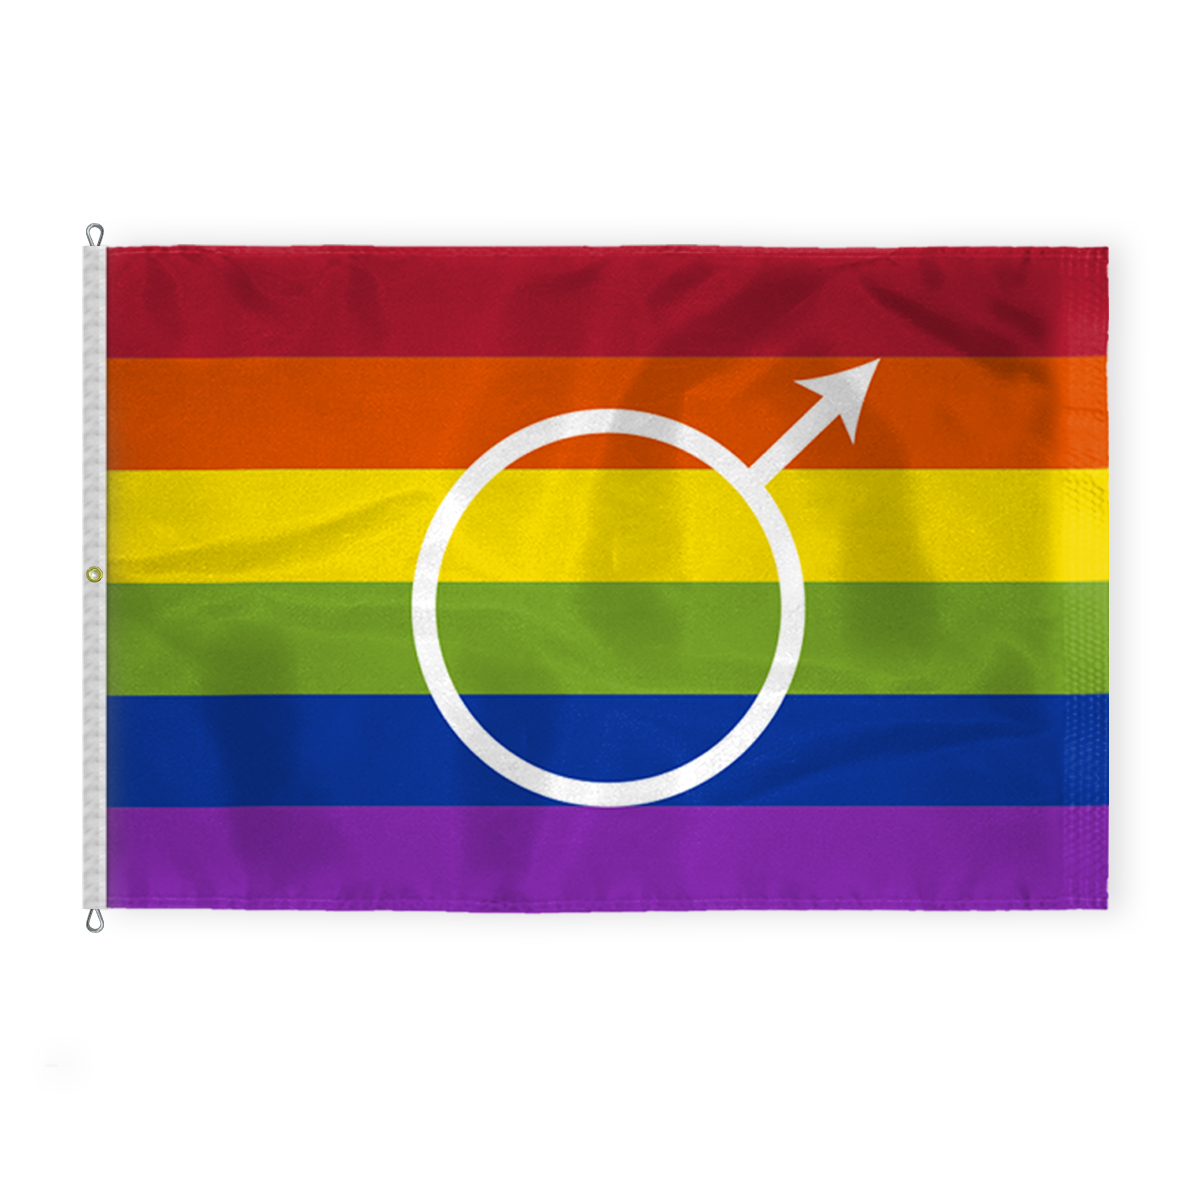 AGAS Large Gay Male Pride Flag 8x12 Ft - Double Sided Printed 200D Nylon